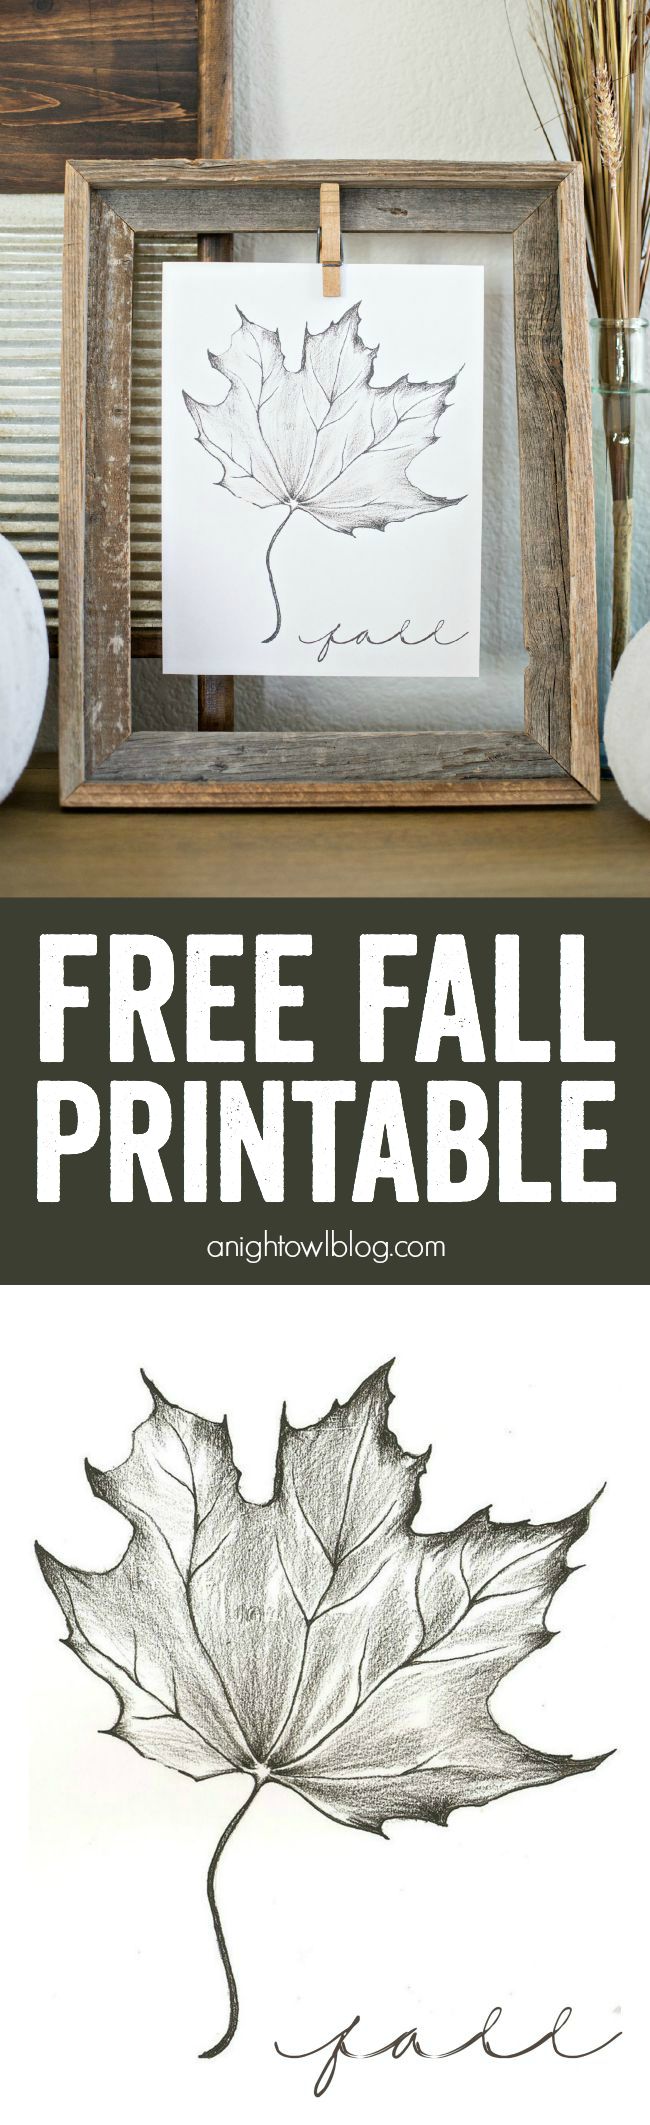 Download and print this Free Fall Printable for instant rustic fall decor!